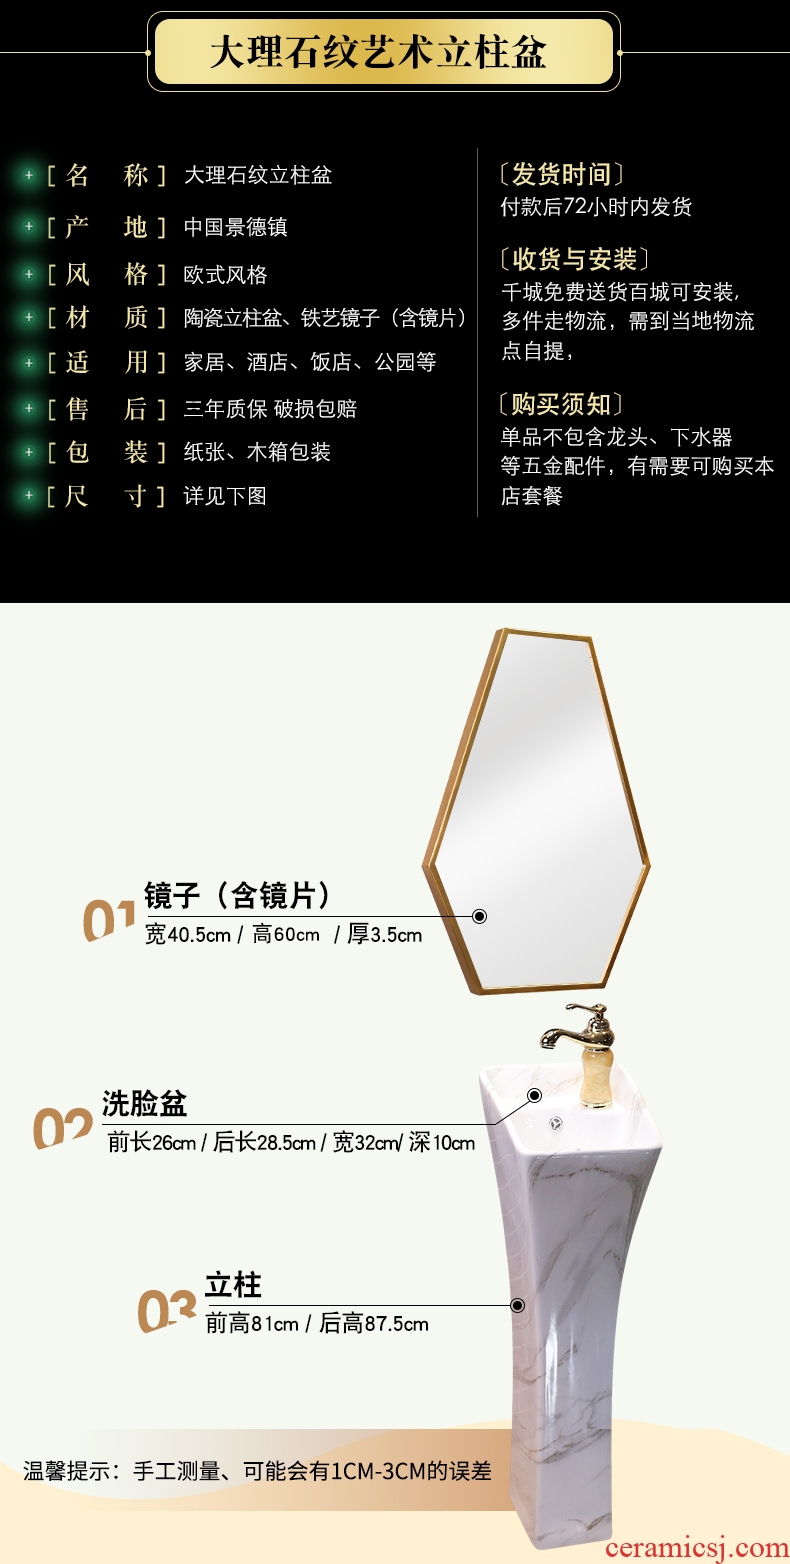 Ling yu, small family pillar basin floor ceramic lavatory small vertical integrated sink basin to Europe type column